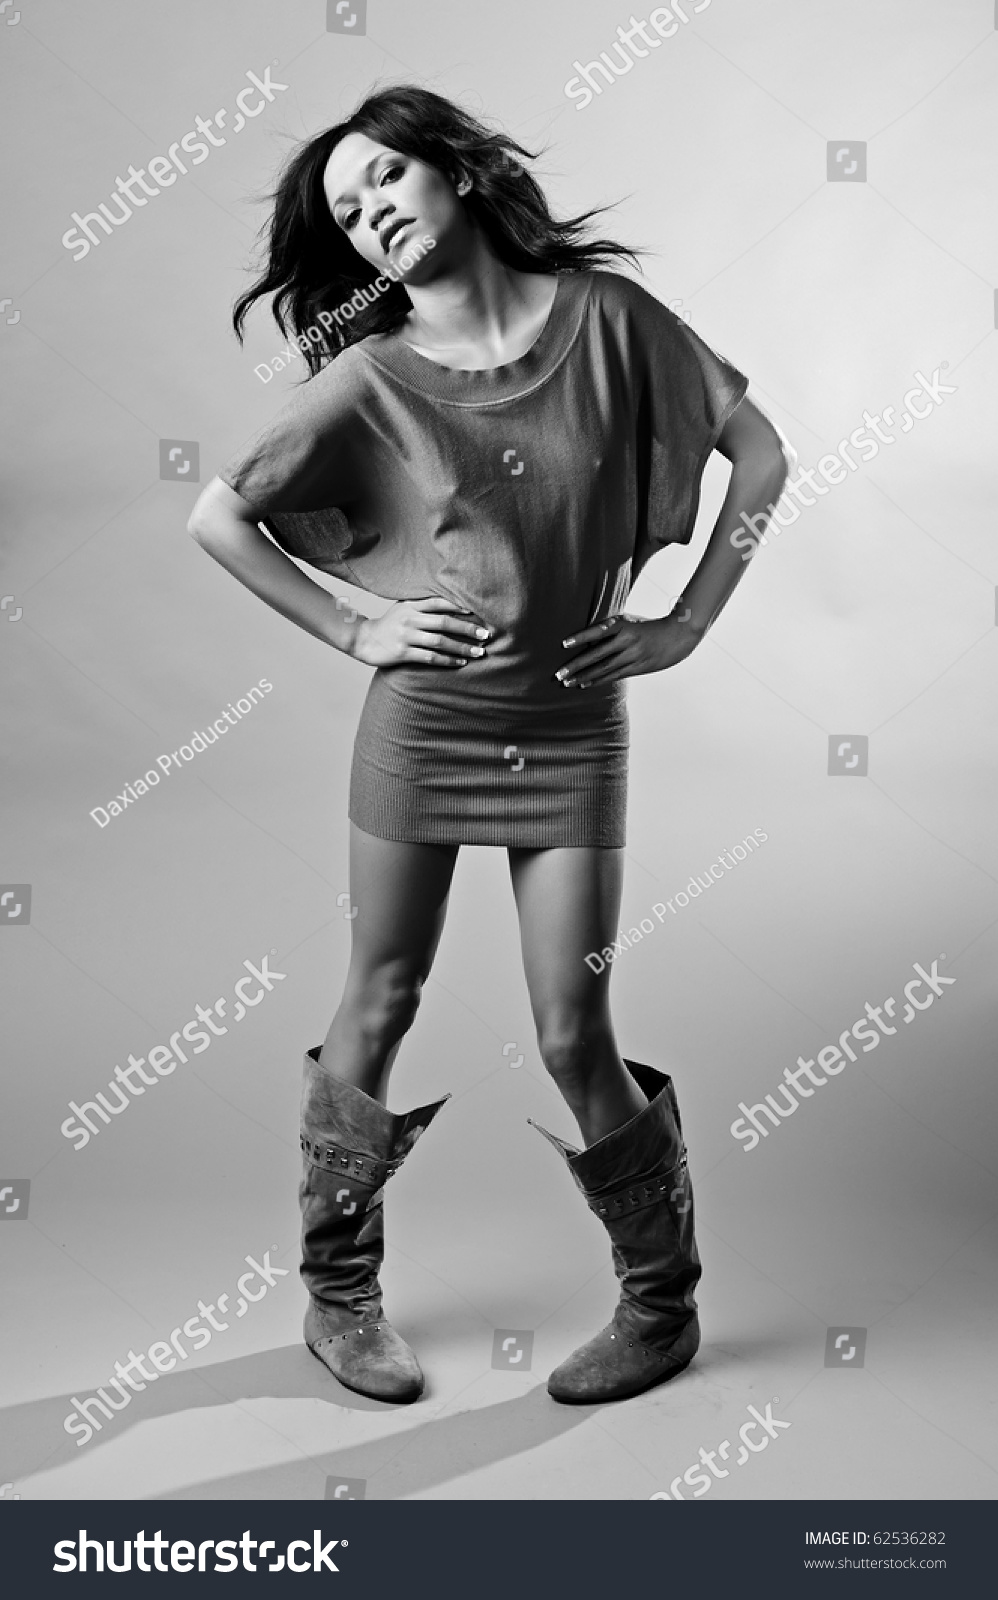 Fashion Model Hands On Hips Stock Photo 62536282 - Shutterstock